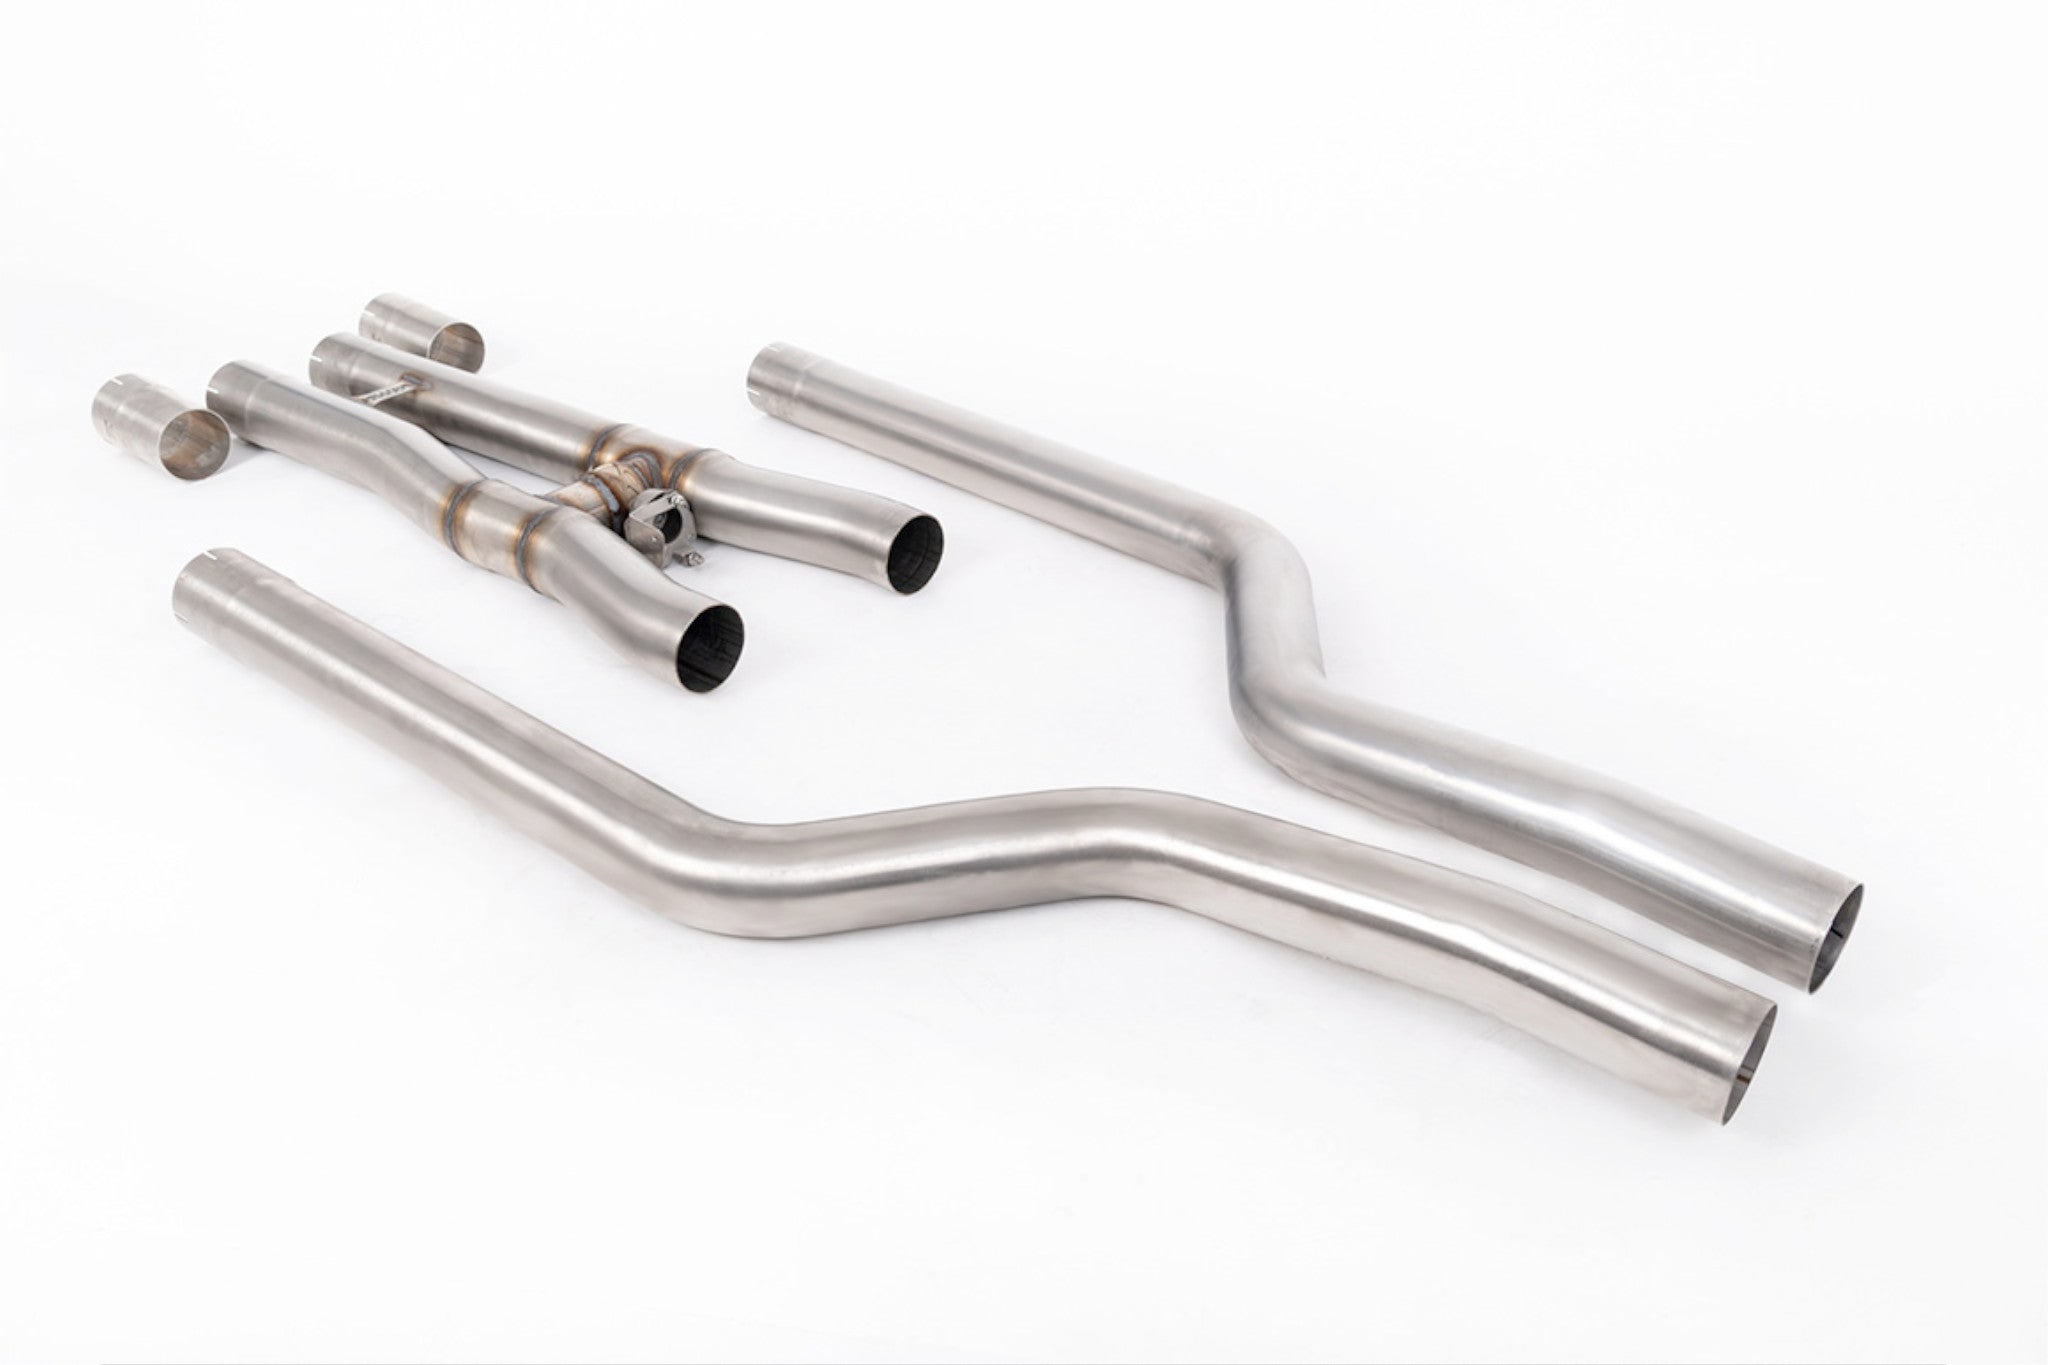 Milltek OPF/GPF Bypass Non-Resonated (Louder) For OEM Downpipes & System - BMW F90 M5 - Evolve Automotive